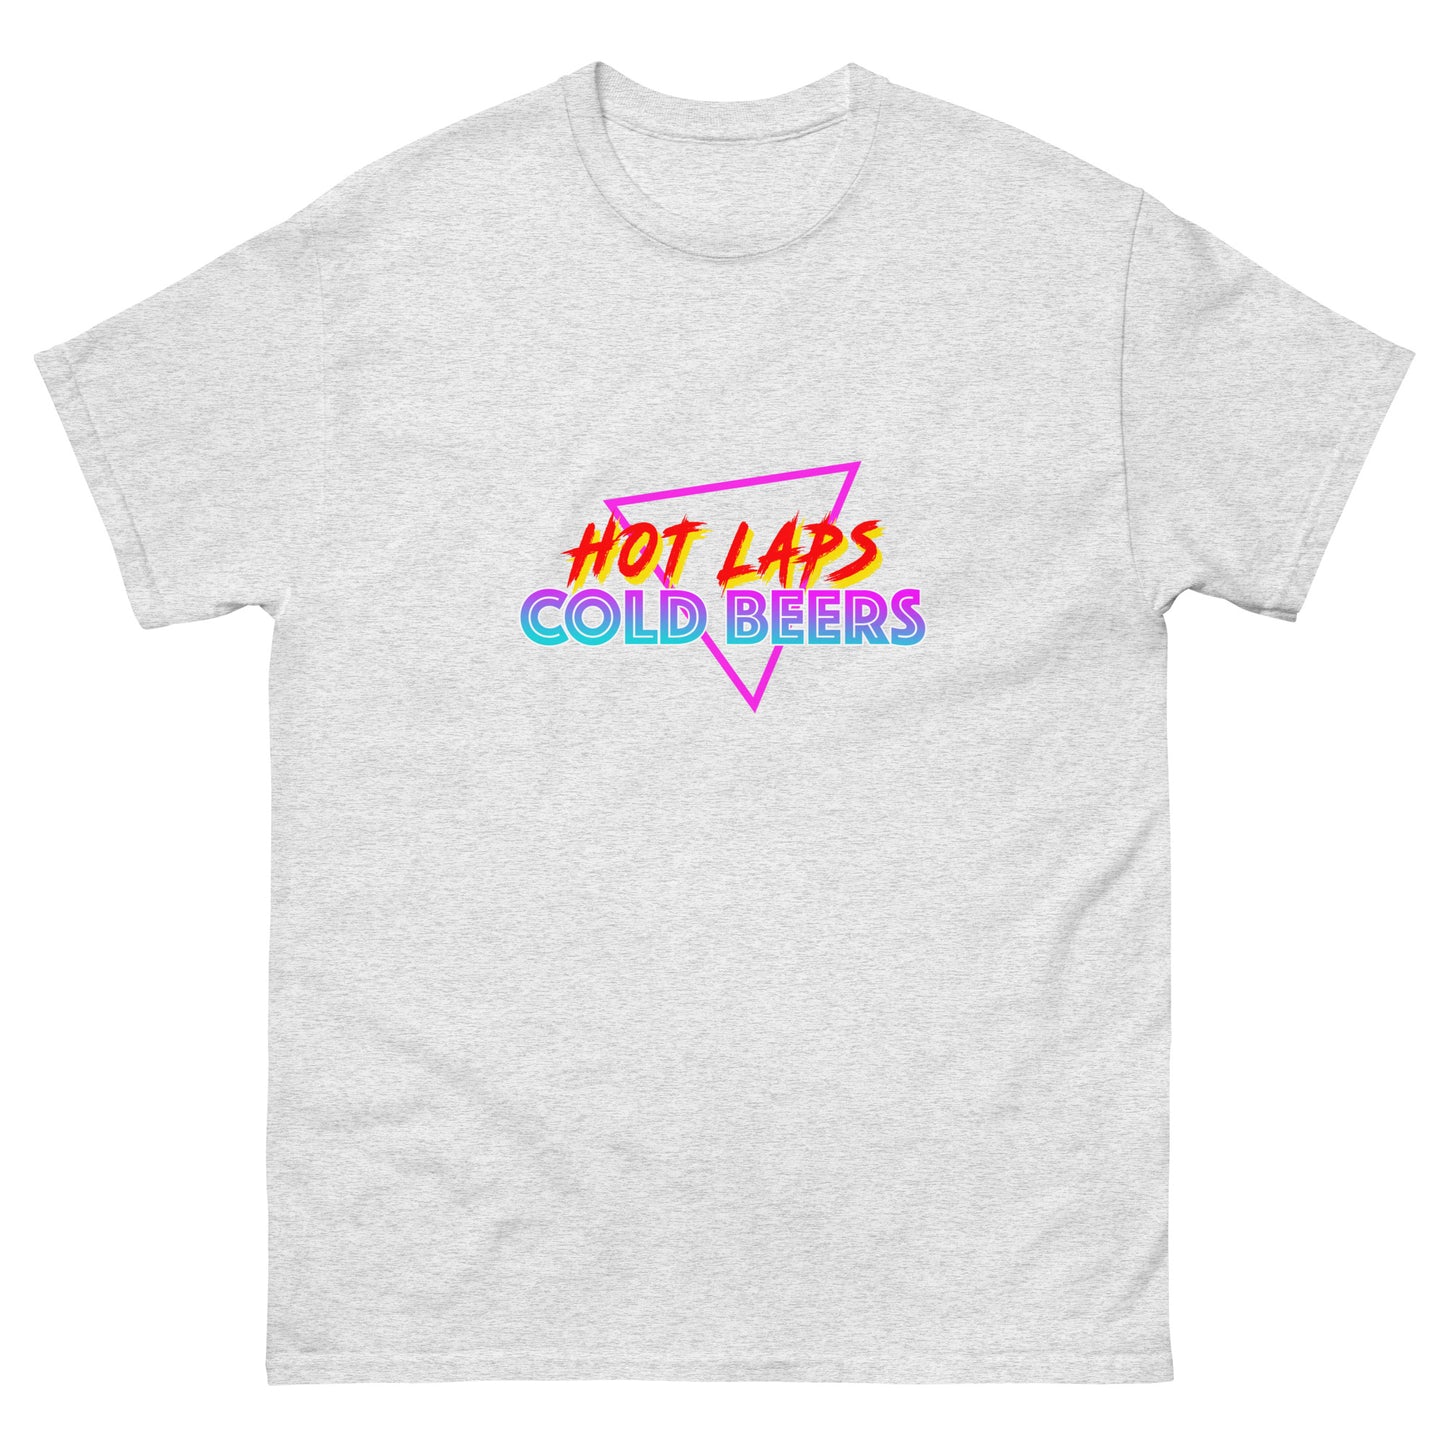 Hot Laps Cold Beers t-shirt printed by Whistler Shirts